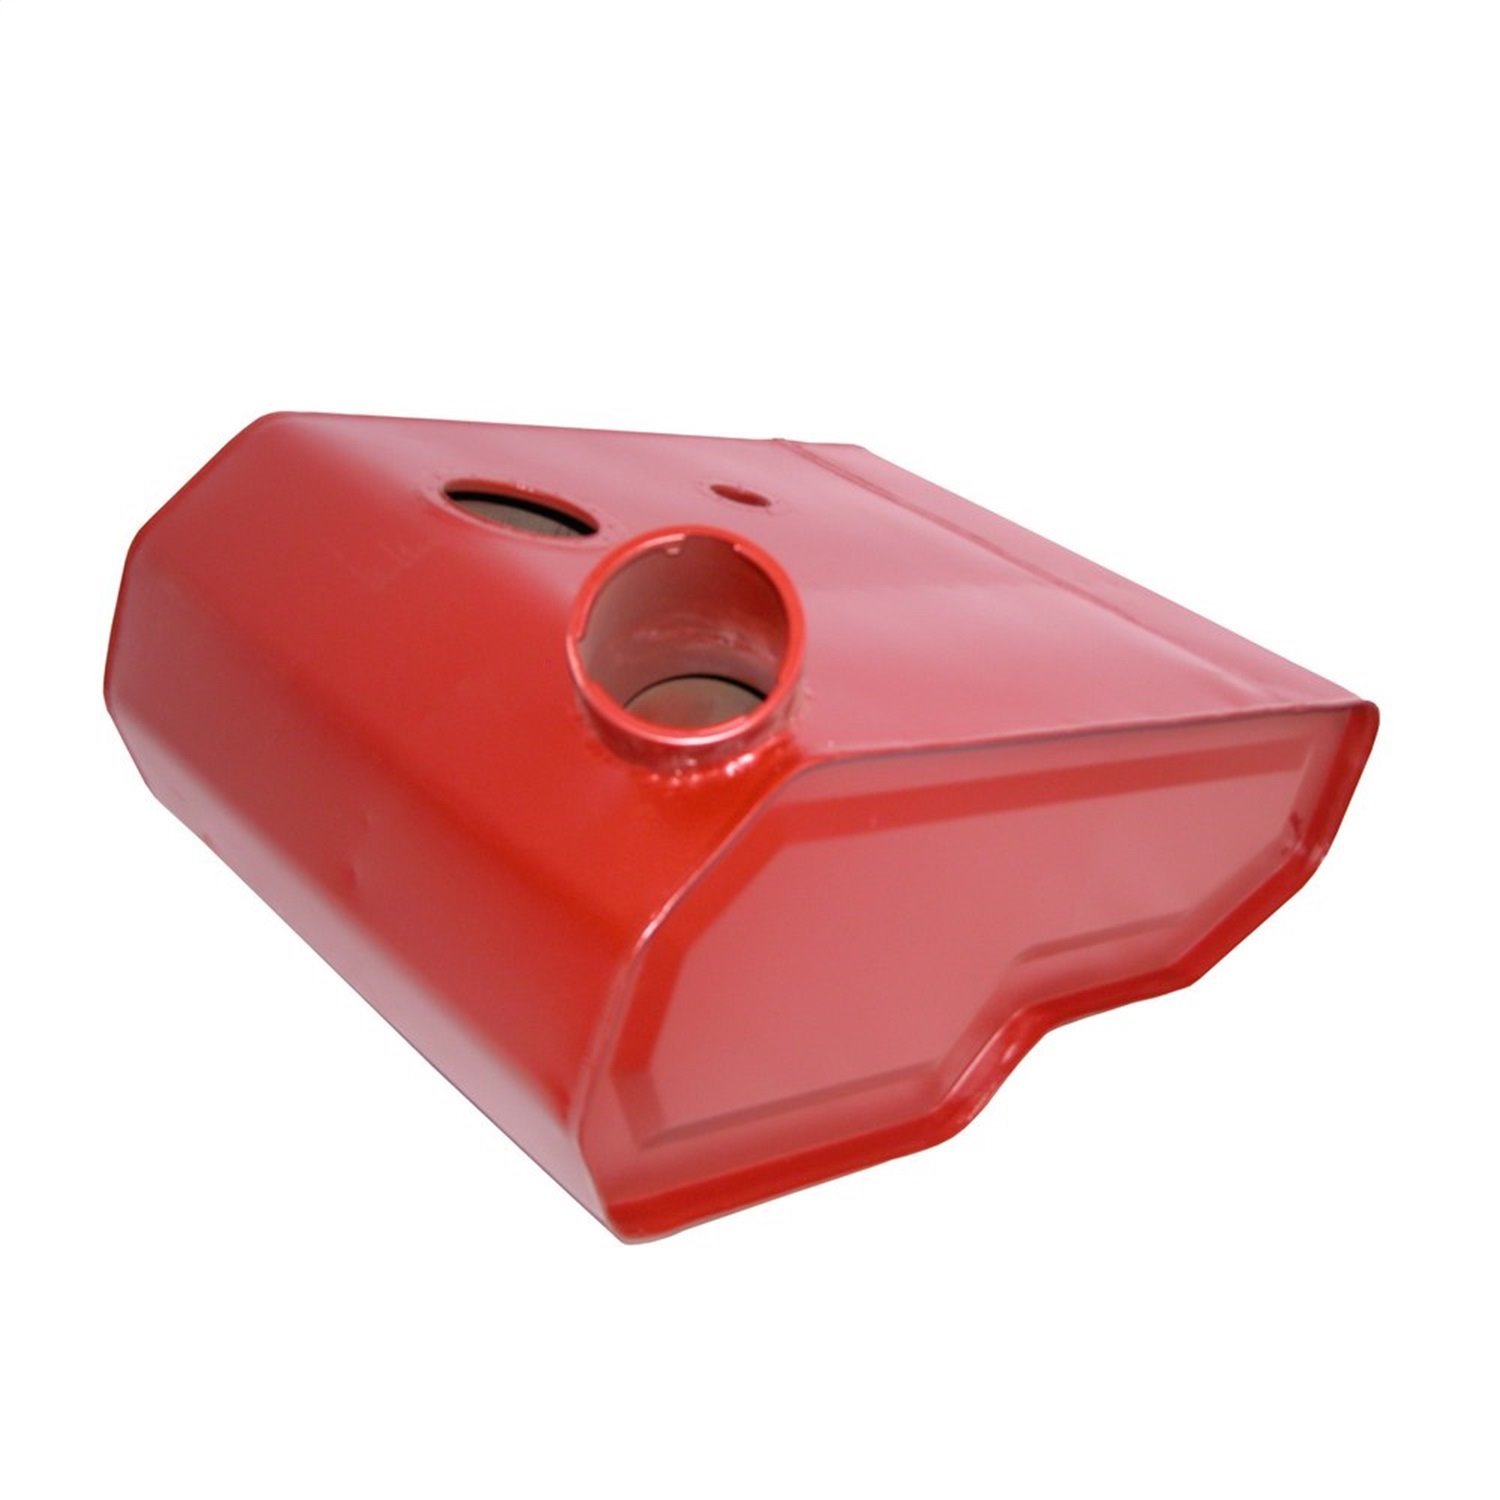 This reproduction steel Gas/Fuel tank from Omix-ADA mounts